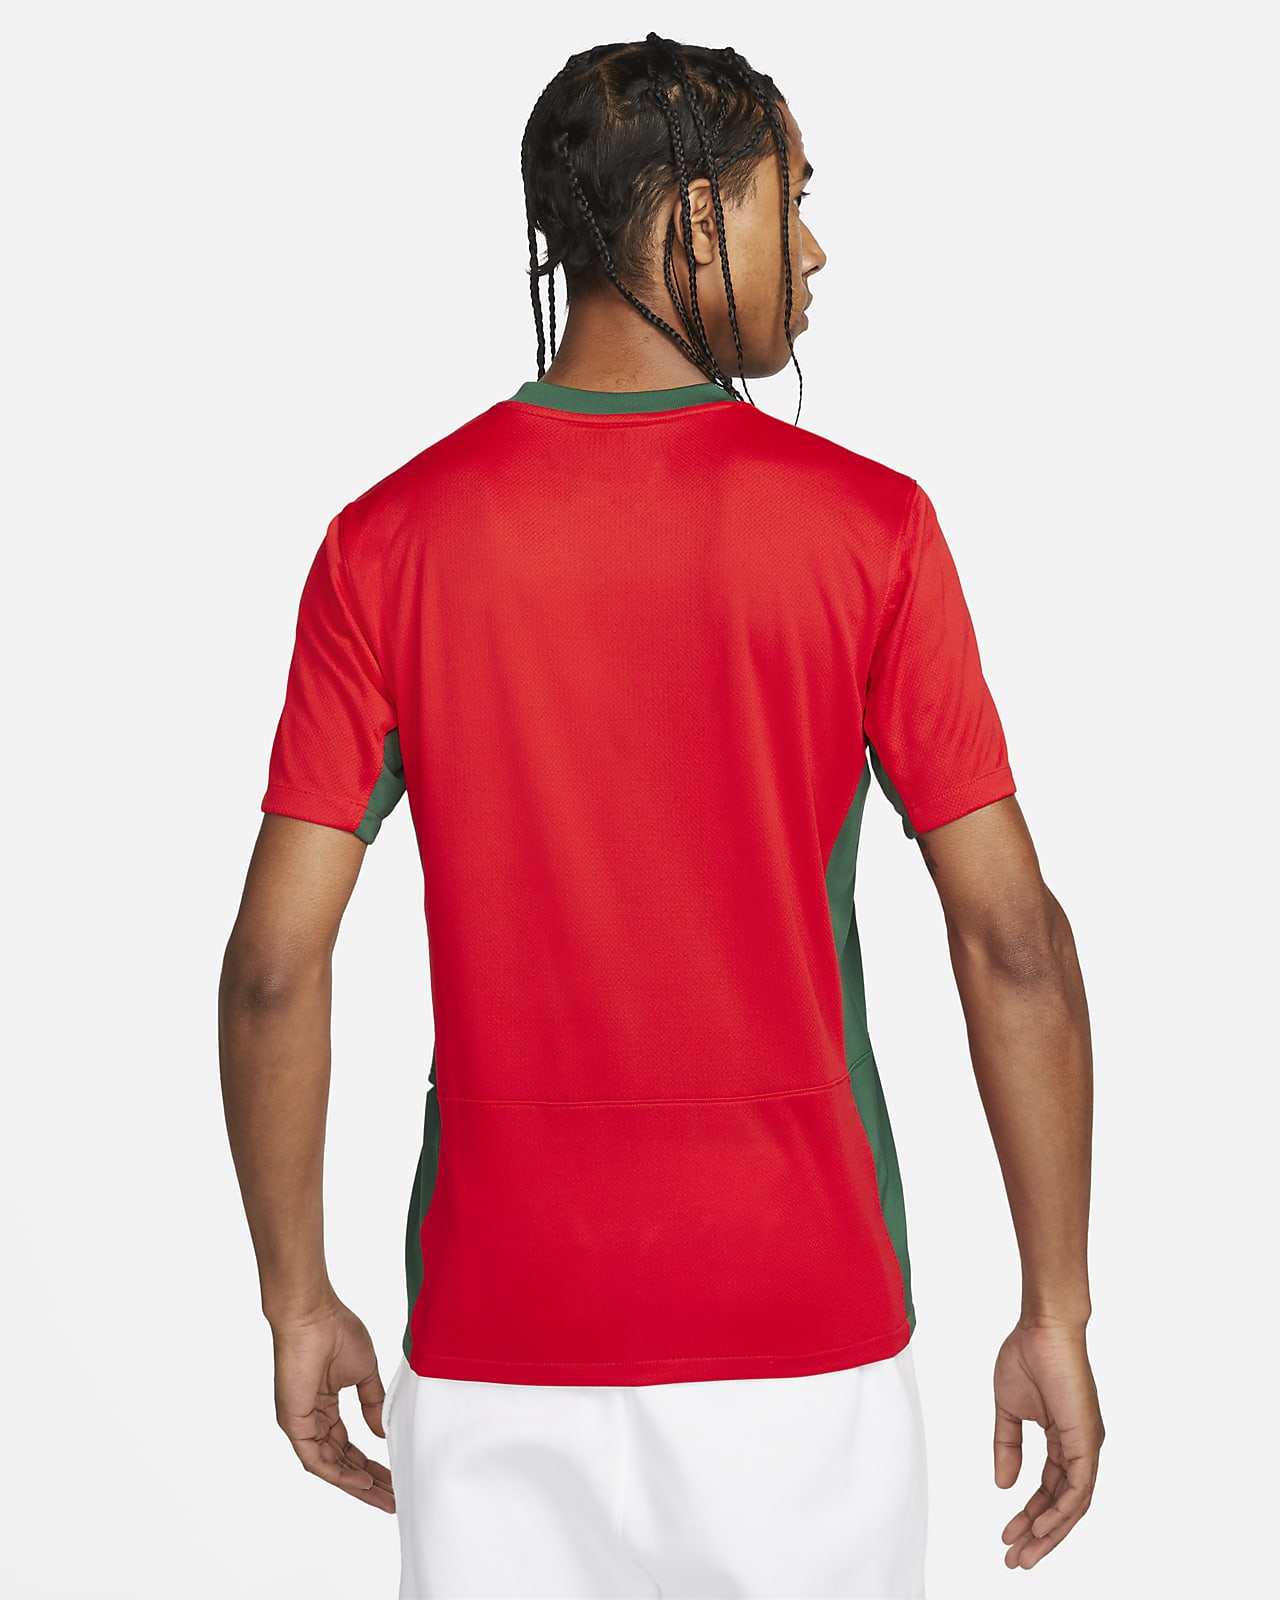 portugal football team jersey online shopping